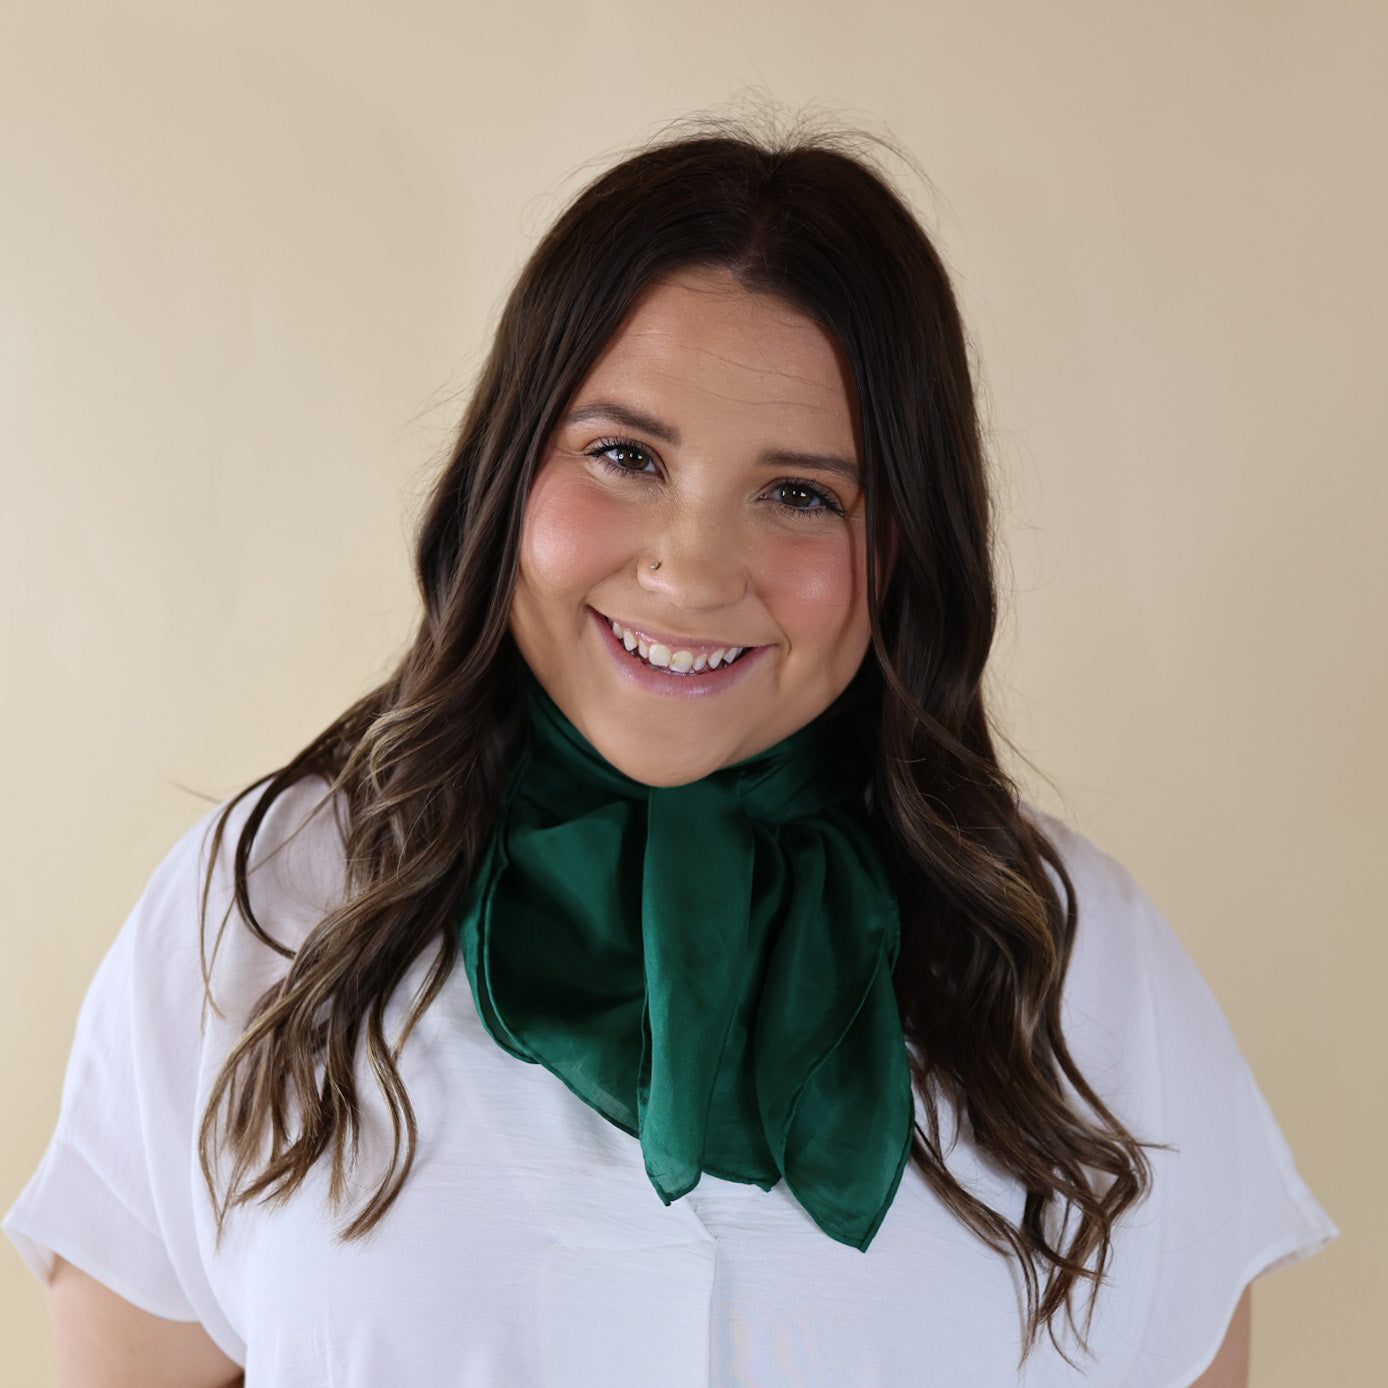 Brunette model is pictured wearing a White, Drop shoulder top with a Solid Green scarf tied around her neck. Model is pictured in front of a beige background.